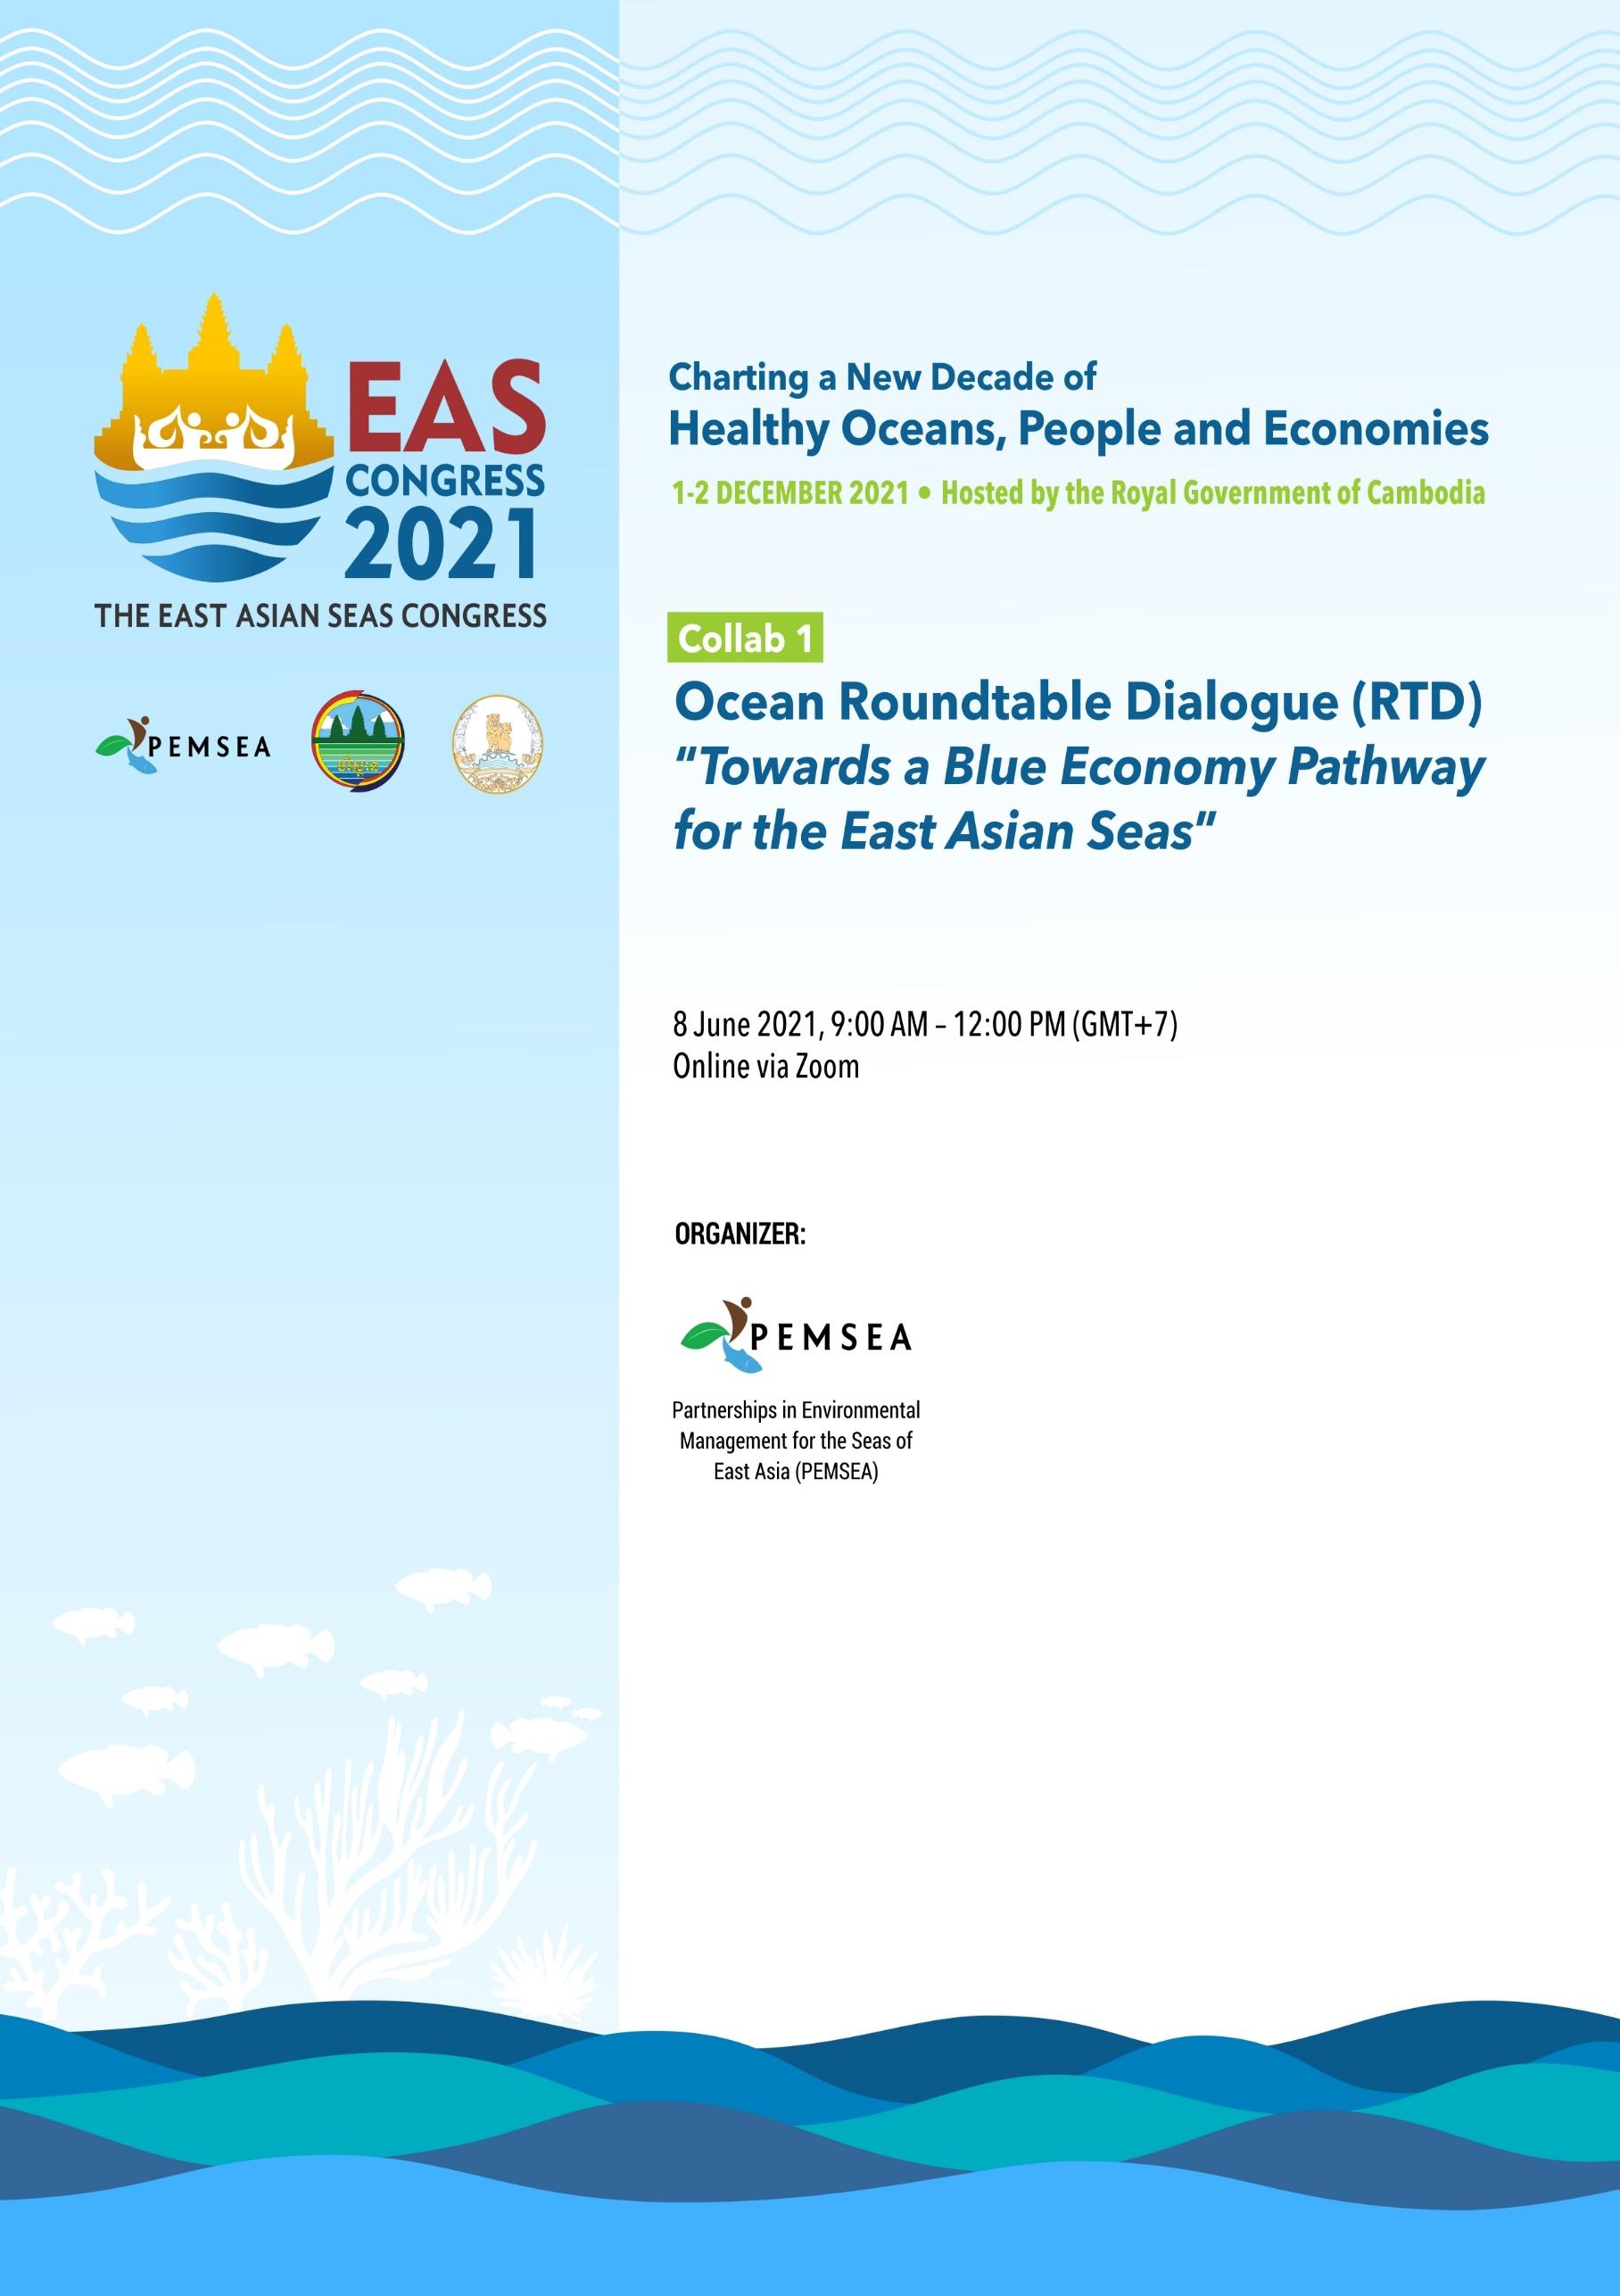 Collab 1 Ocean Roundtable Dialogue (RTD) “Towards a Blue Economy Pathway for the East Asian Seas”